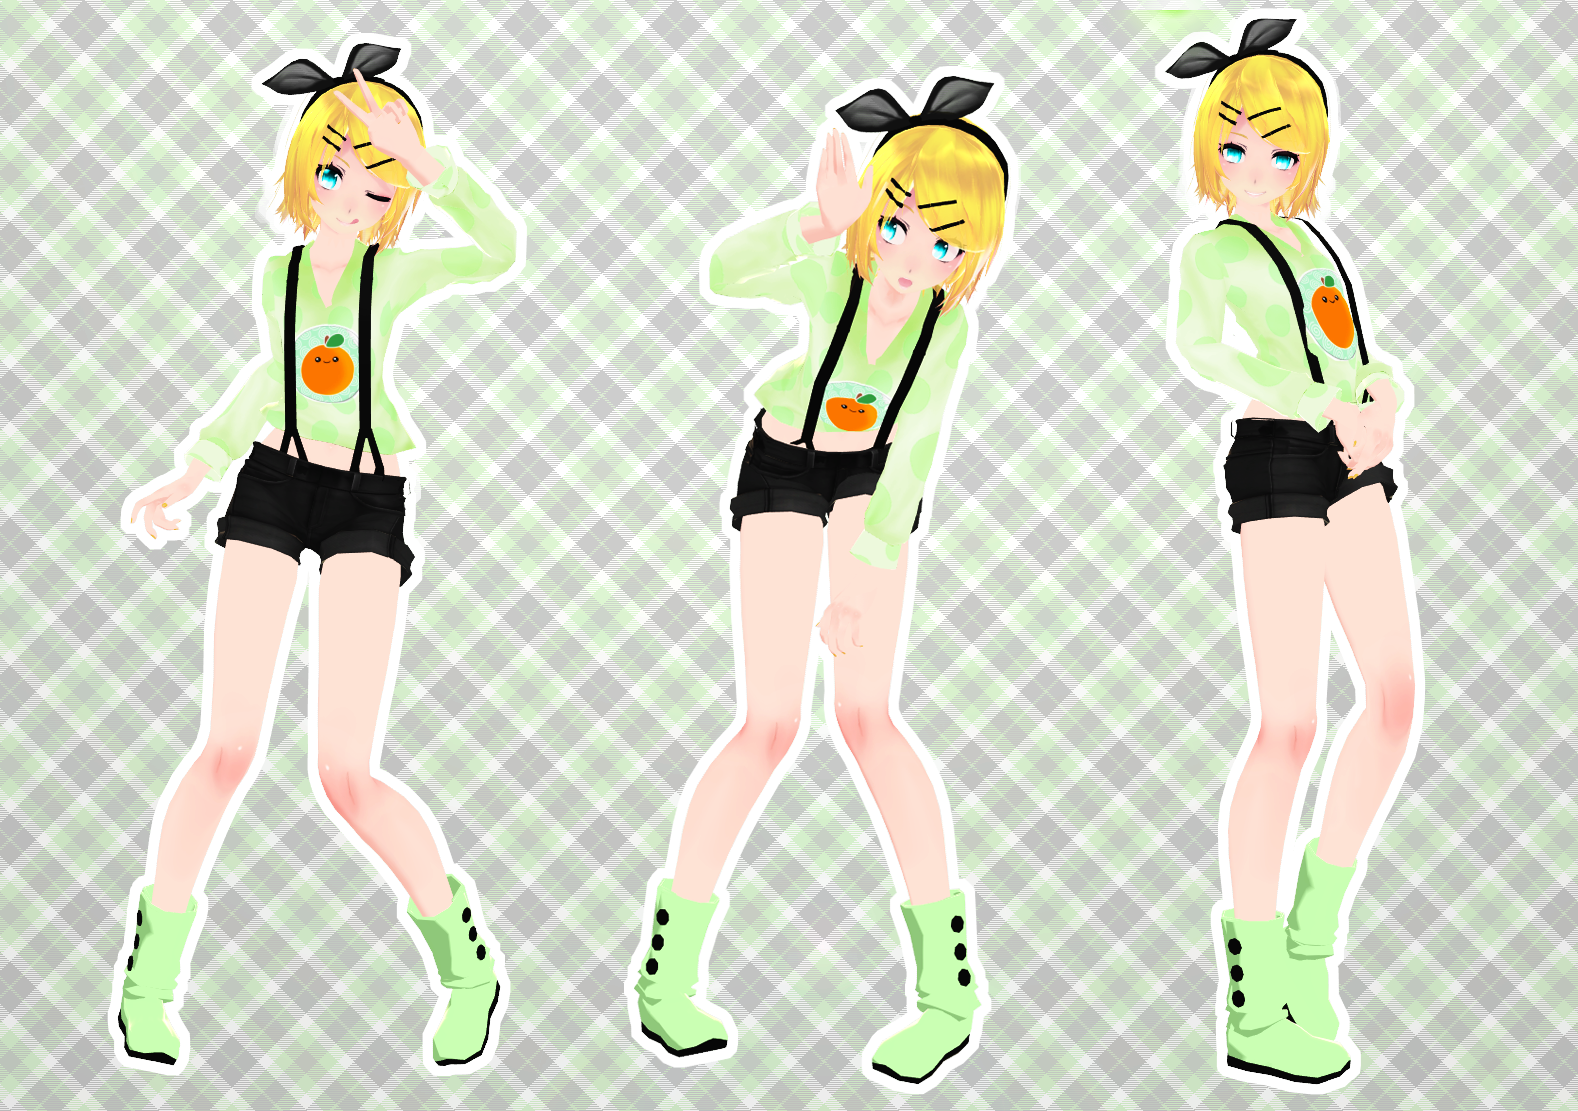 MMD Pose Pack 4.